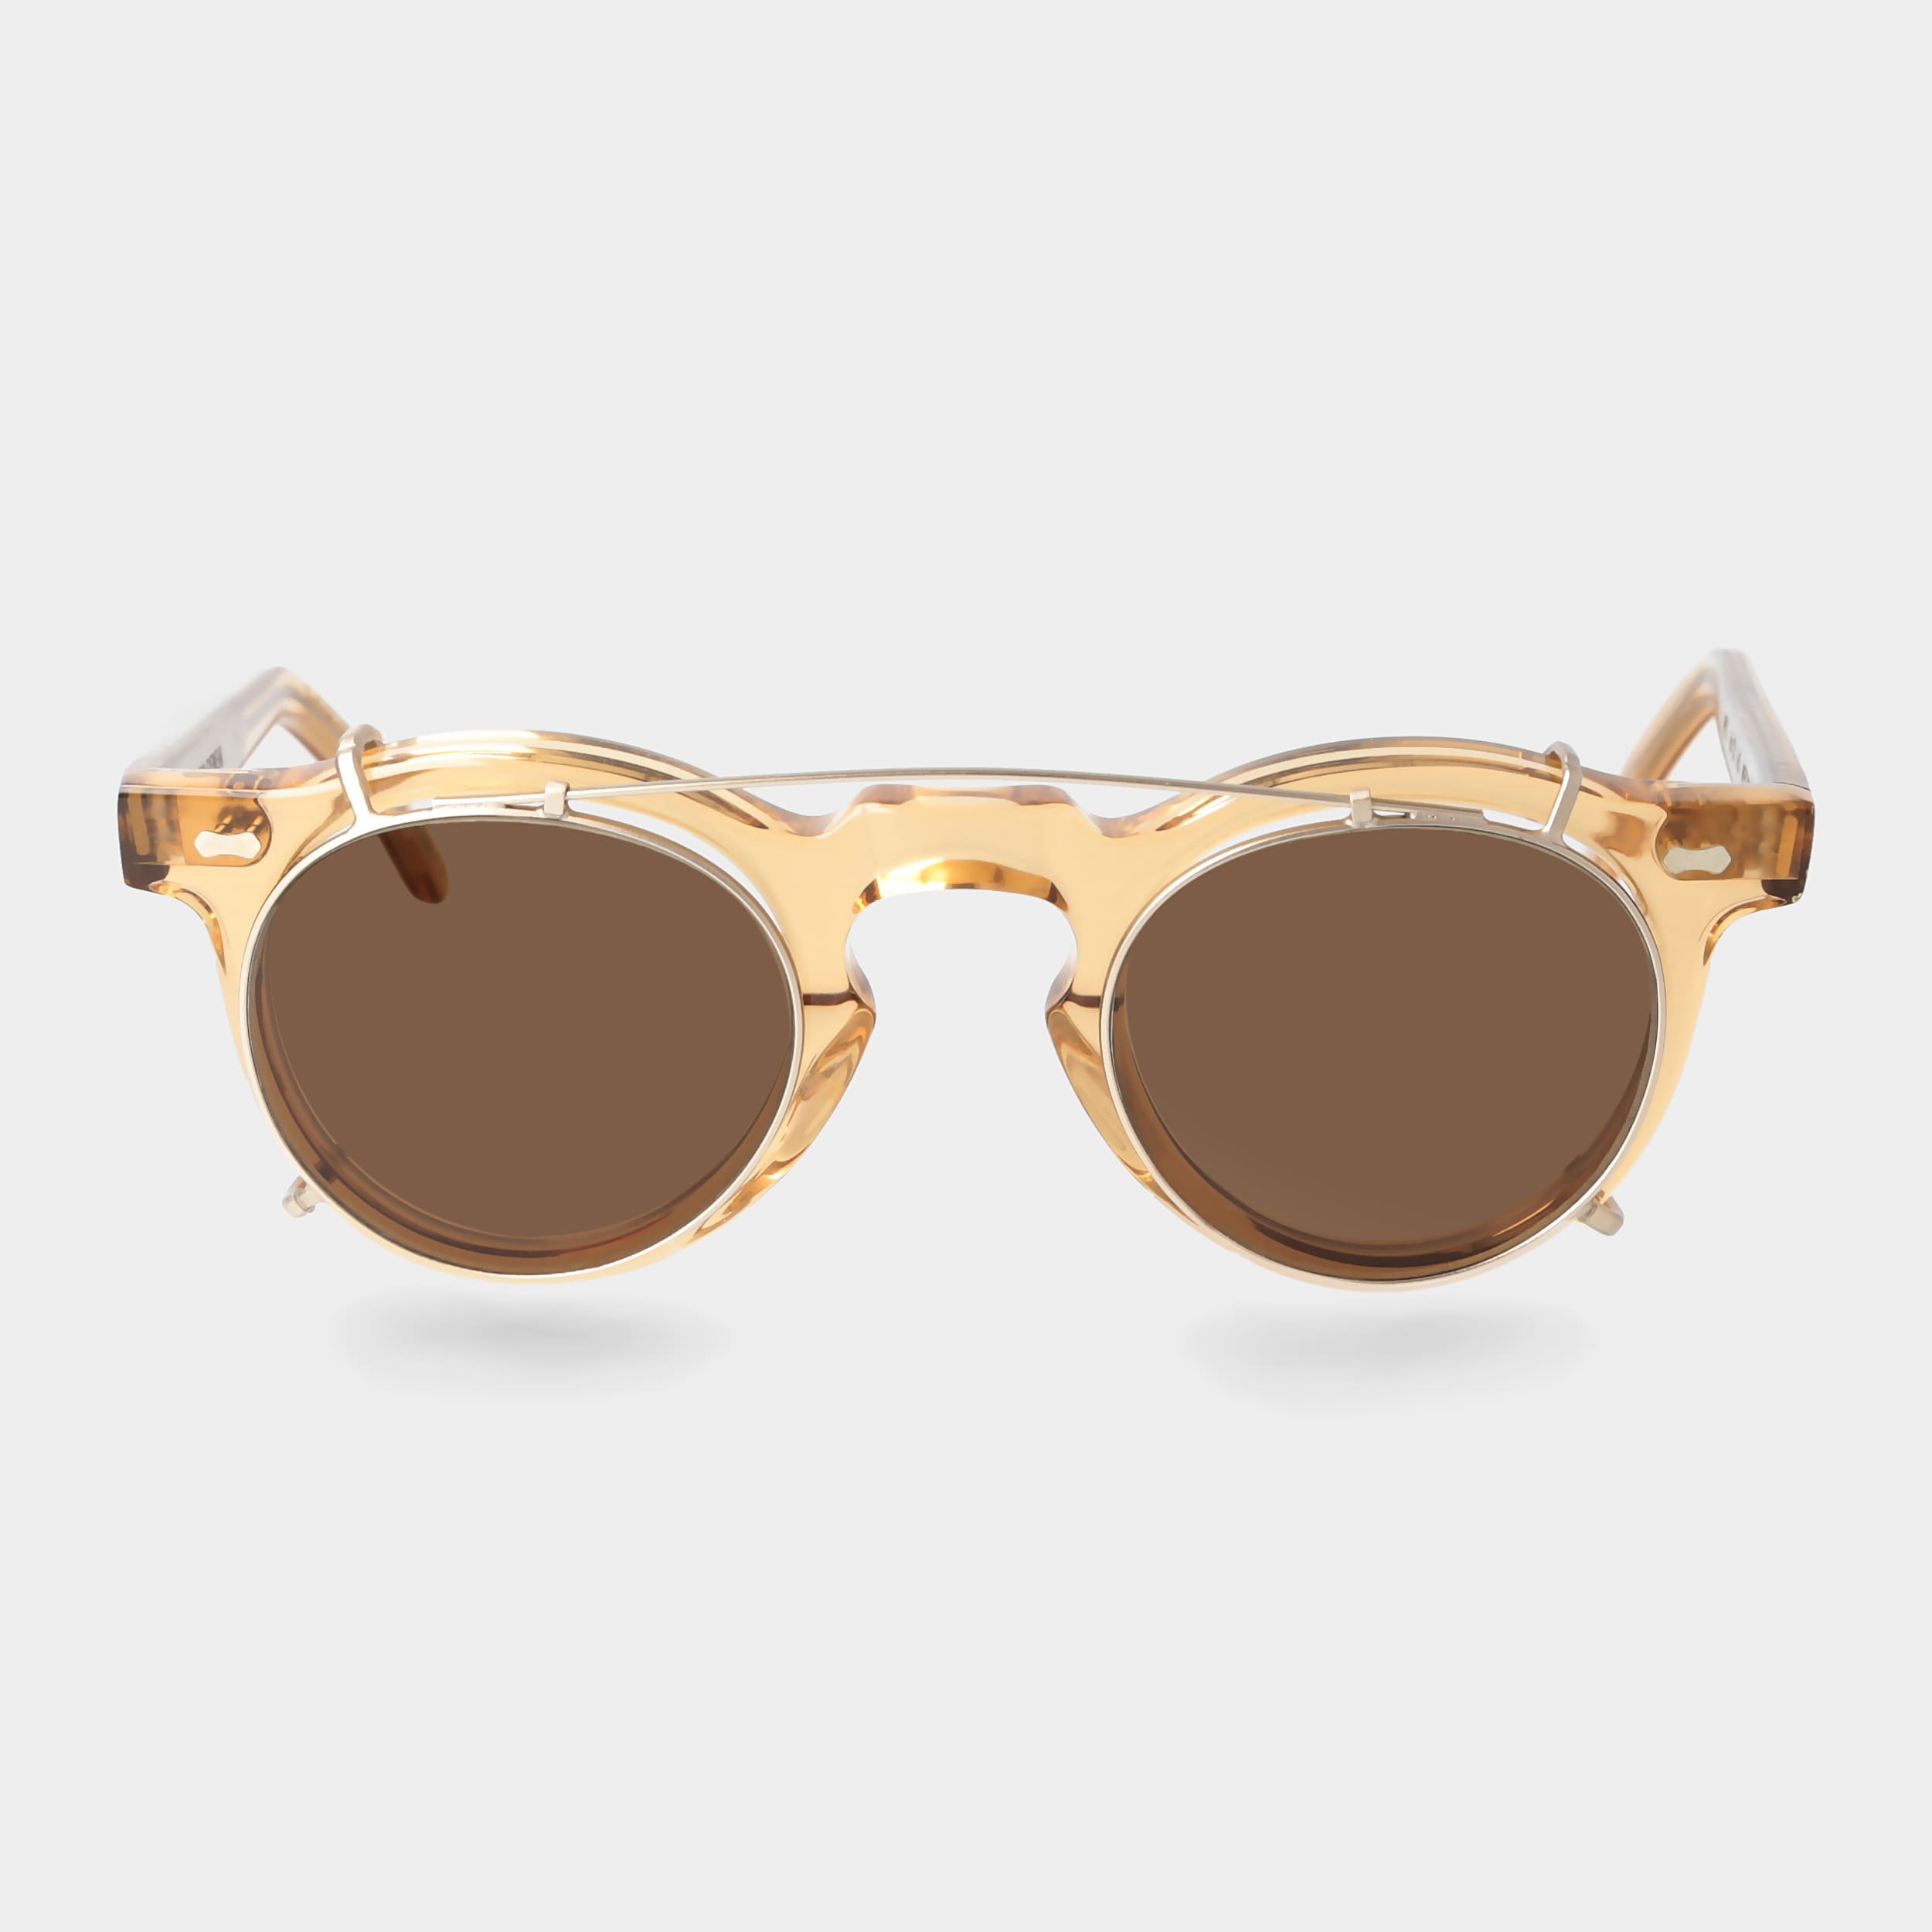 sunglasses-welt-with-clip-gold-tobacco-grey-tbd-eyewear-front